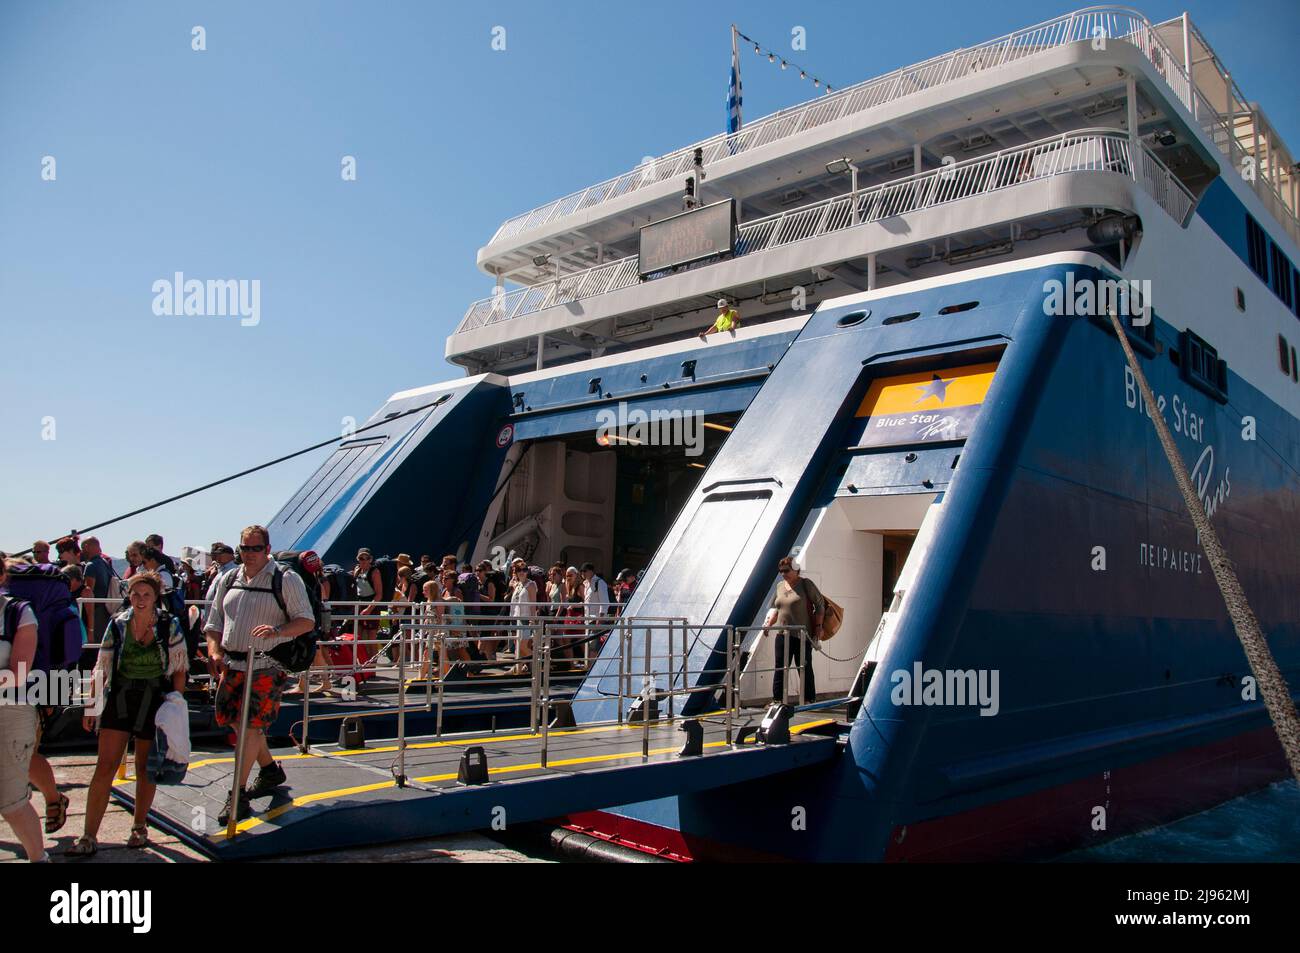 A large group of tourists disembarking from a ferry at the island port in Greece. Concept travel tourism Stock Photo